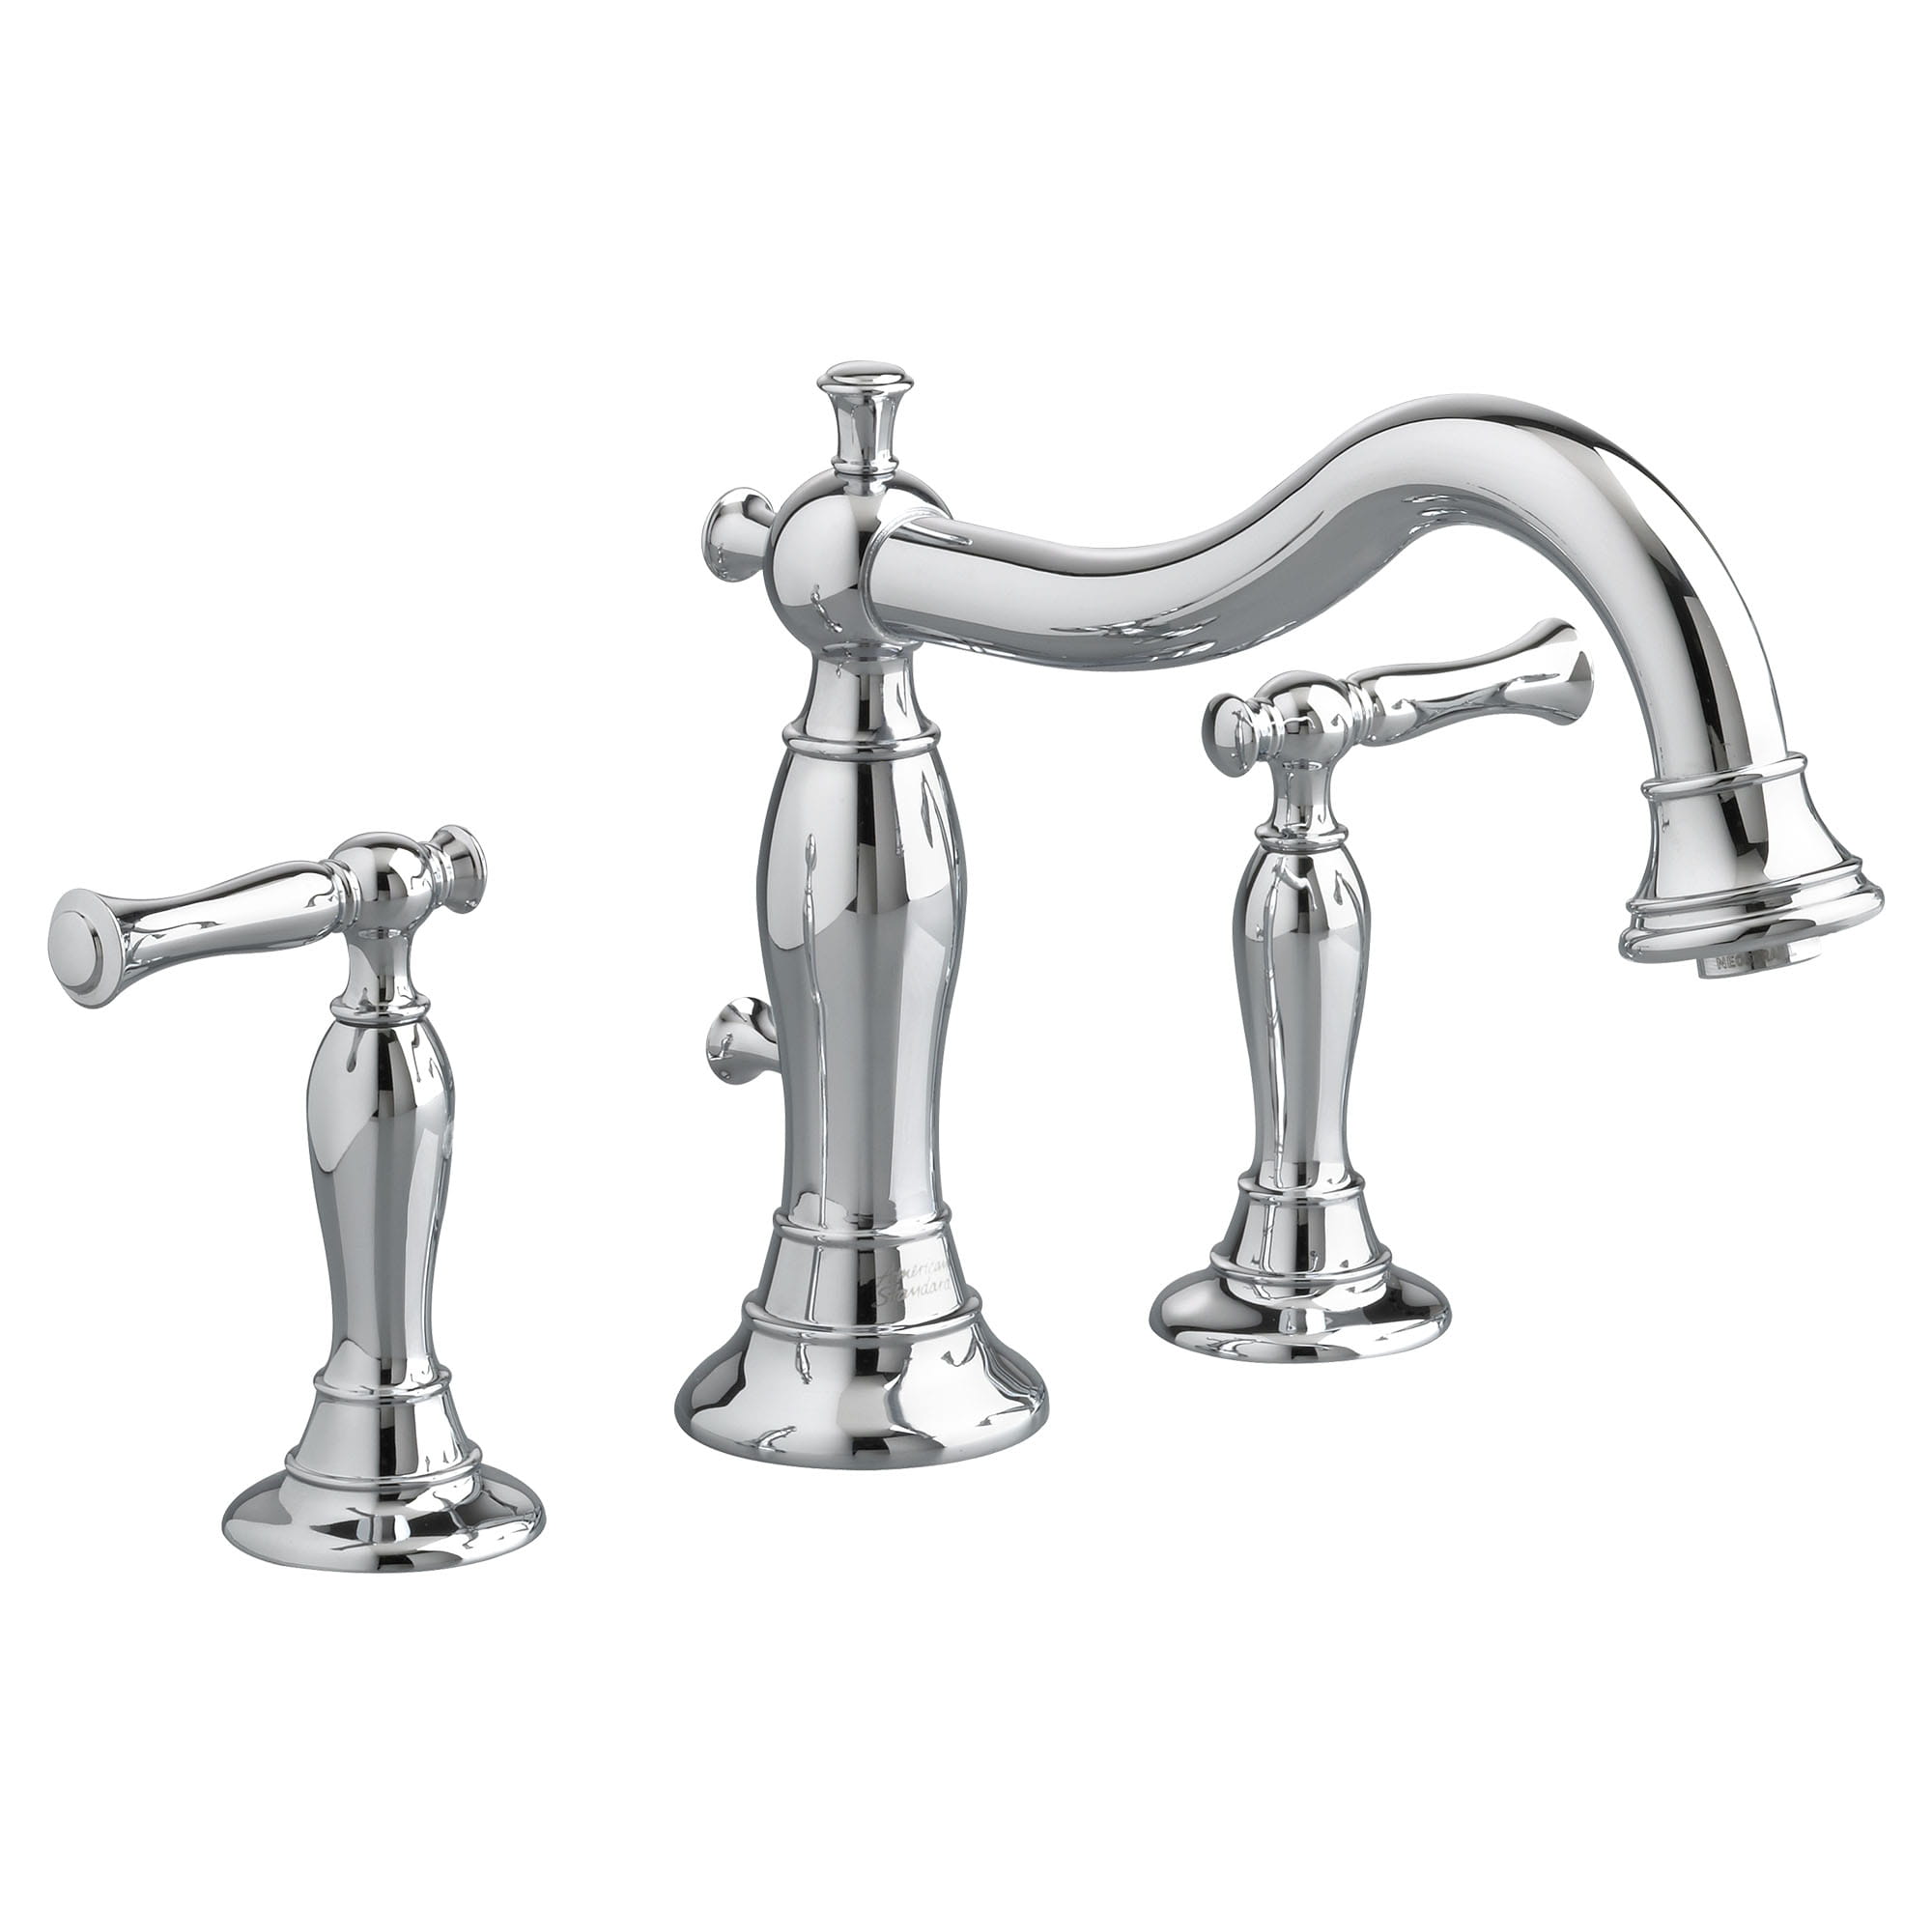 Quentin Bathtub Faucet With Lever Handles for Flash Rough In Valve CHROME